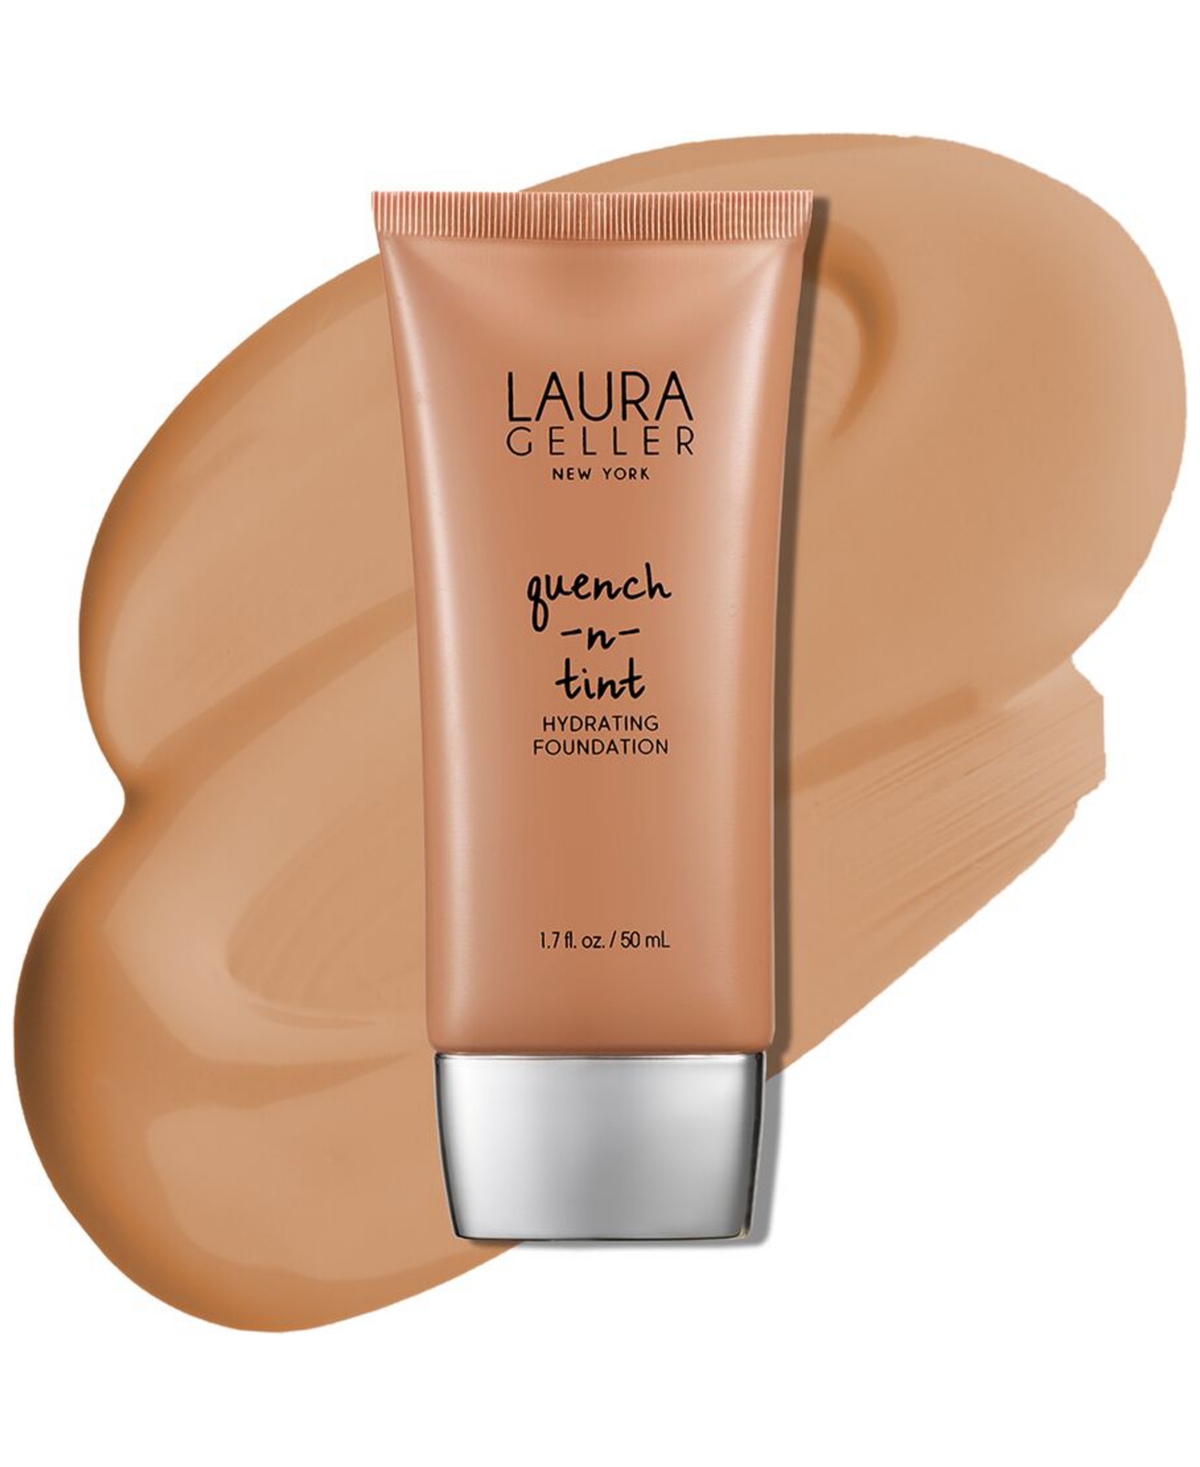 Laura Geller Beauty Quench-n-Tint Hydrating Foundation